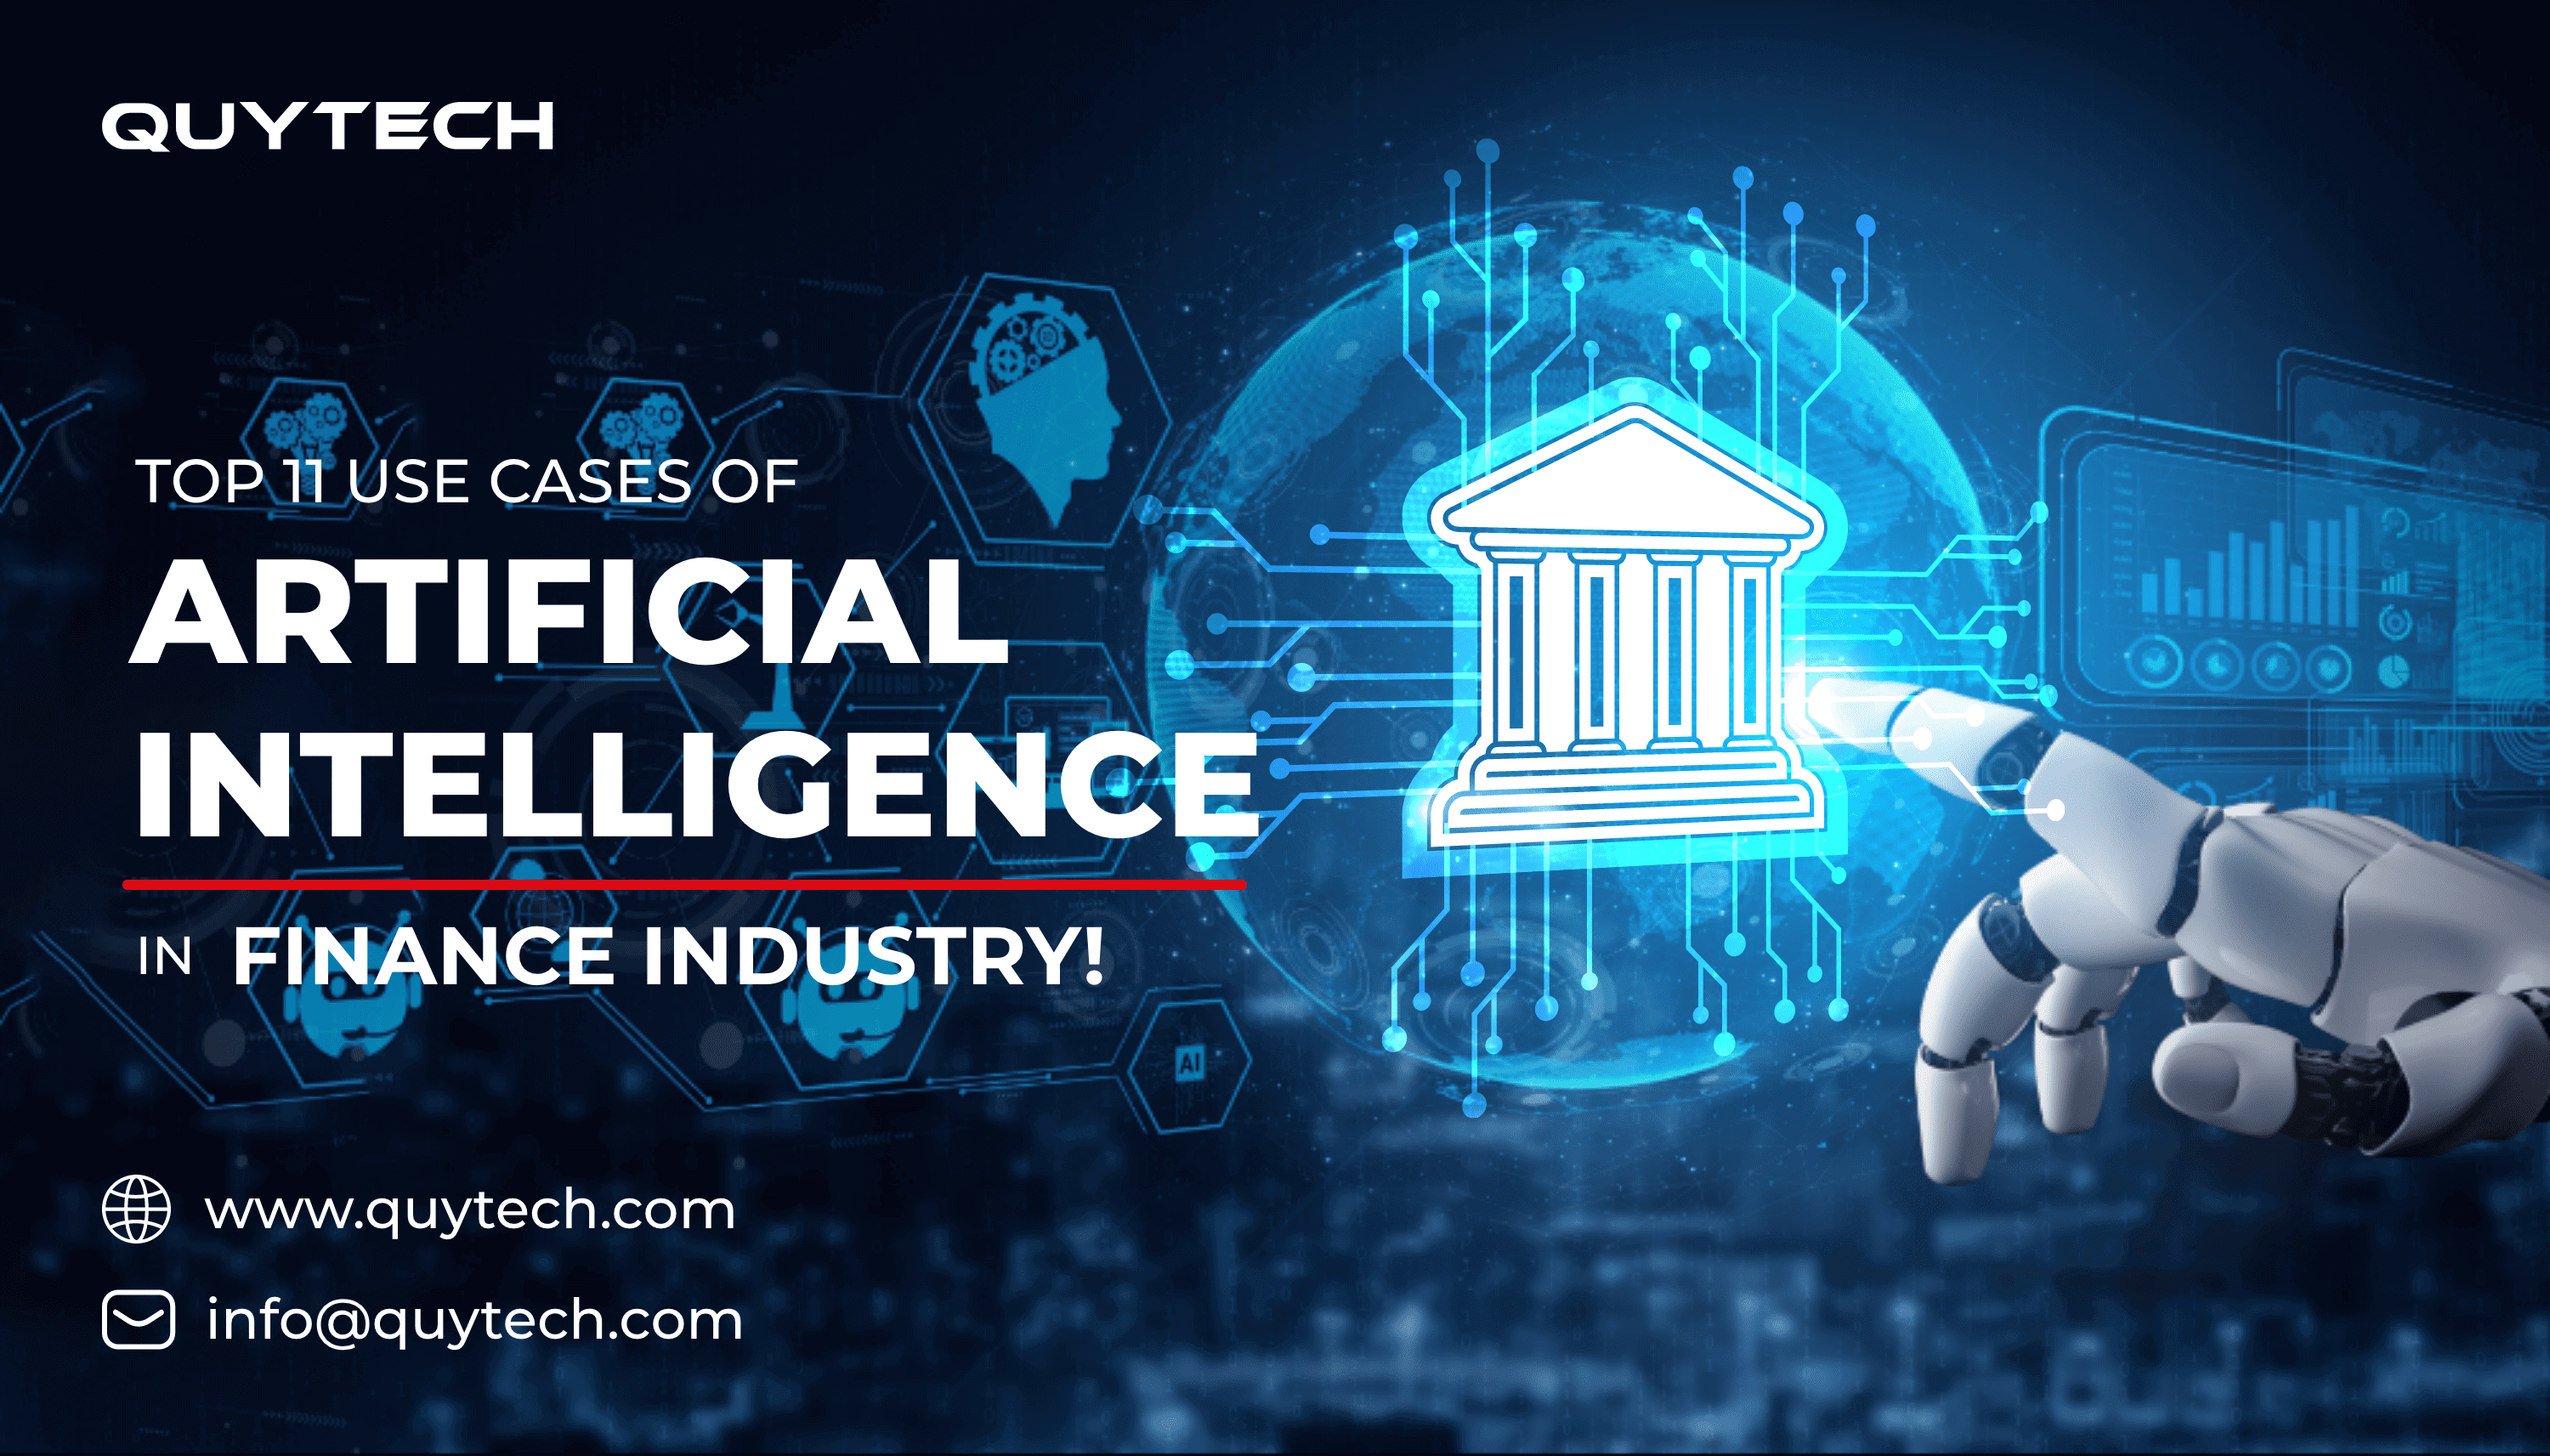 Top 11 Use Cases of Artificial Intelligence(AI) in the Finance Industry